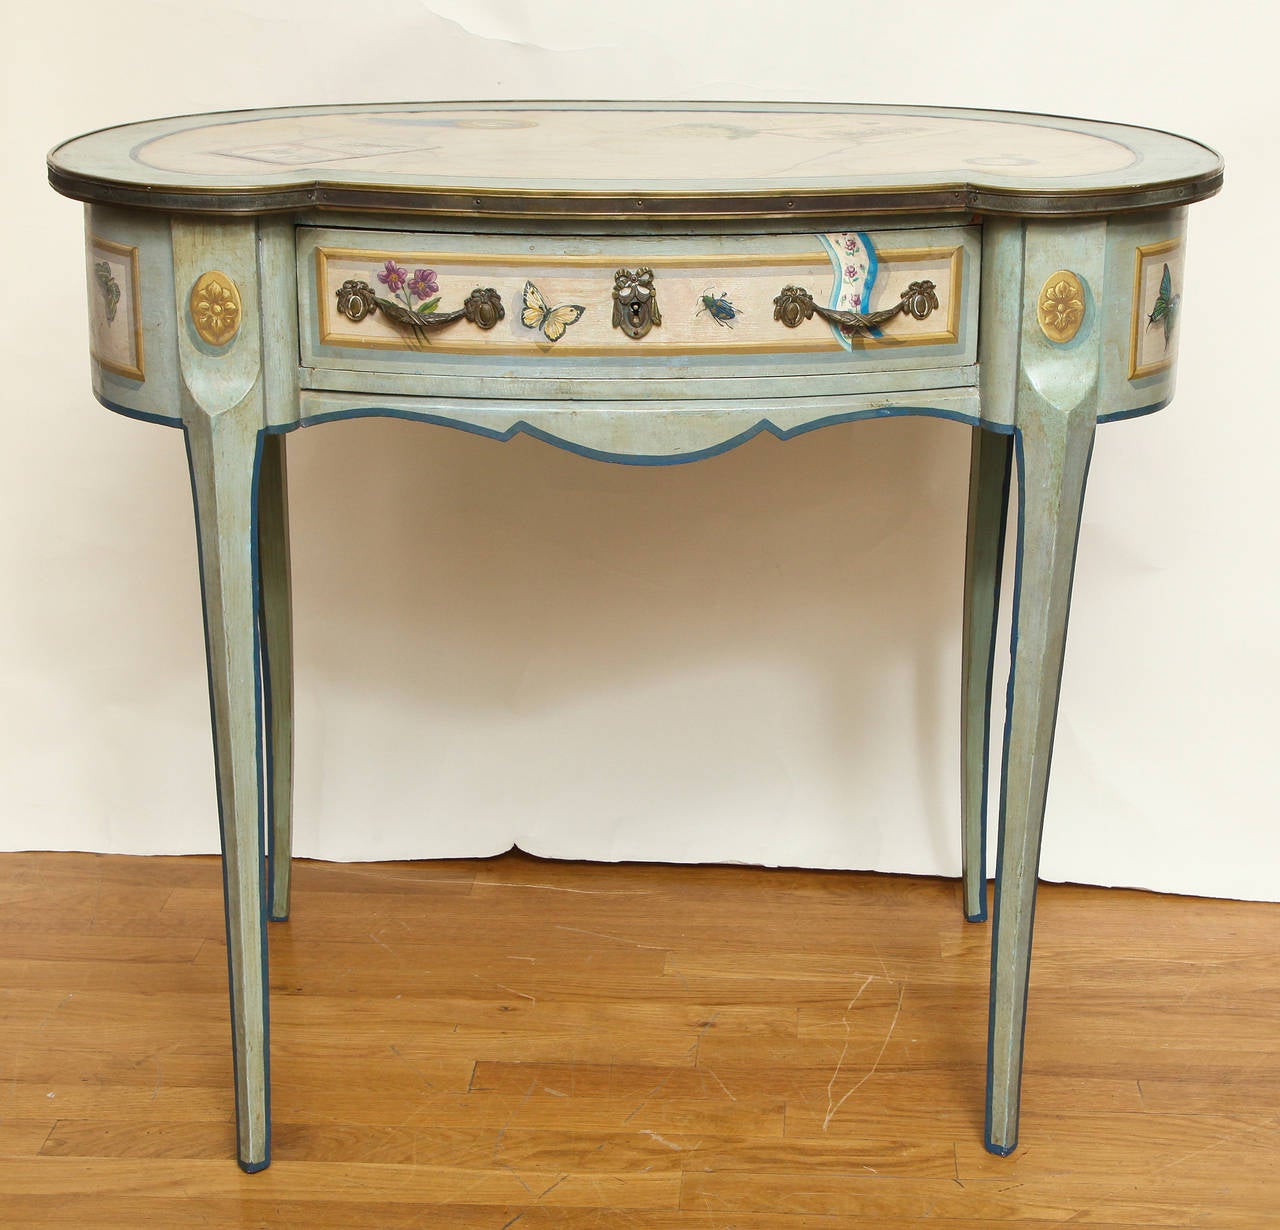 A French Transitional style (Louis XV - Louis XVI) kidney shaped writing table with single drawer in apron having bronze pulls. The painted decorated surfaces having ivory reserves within blue green cross banding and expertly panted trompe l'oeil